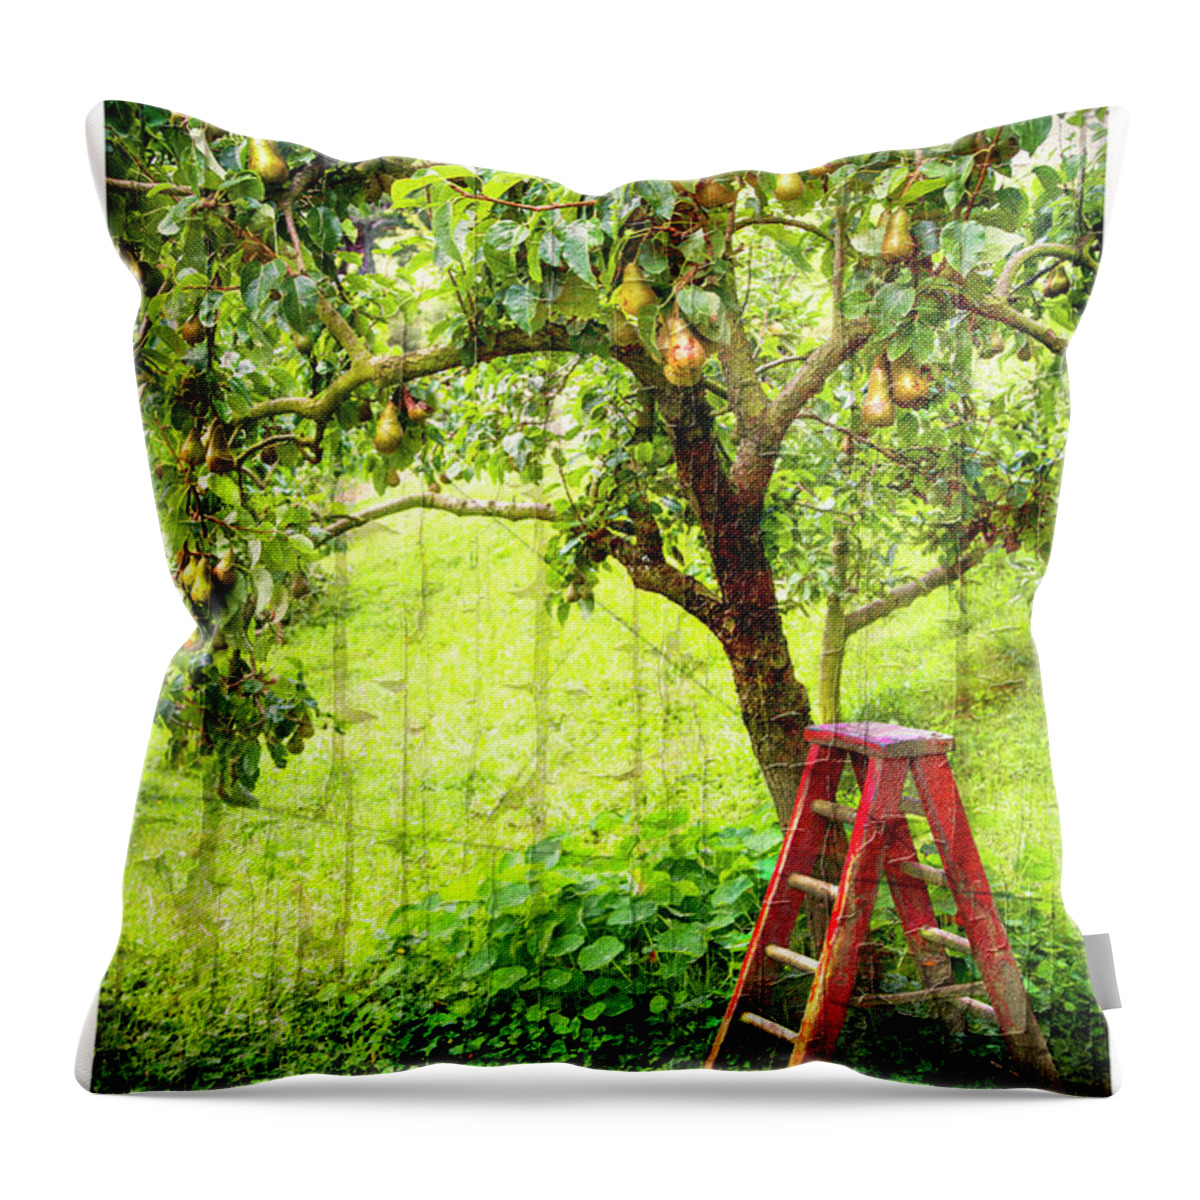 Hobbits Throw Pillow featuring the photograph Hobbit Pear Tree by Kathryn McBride